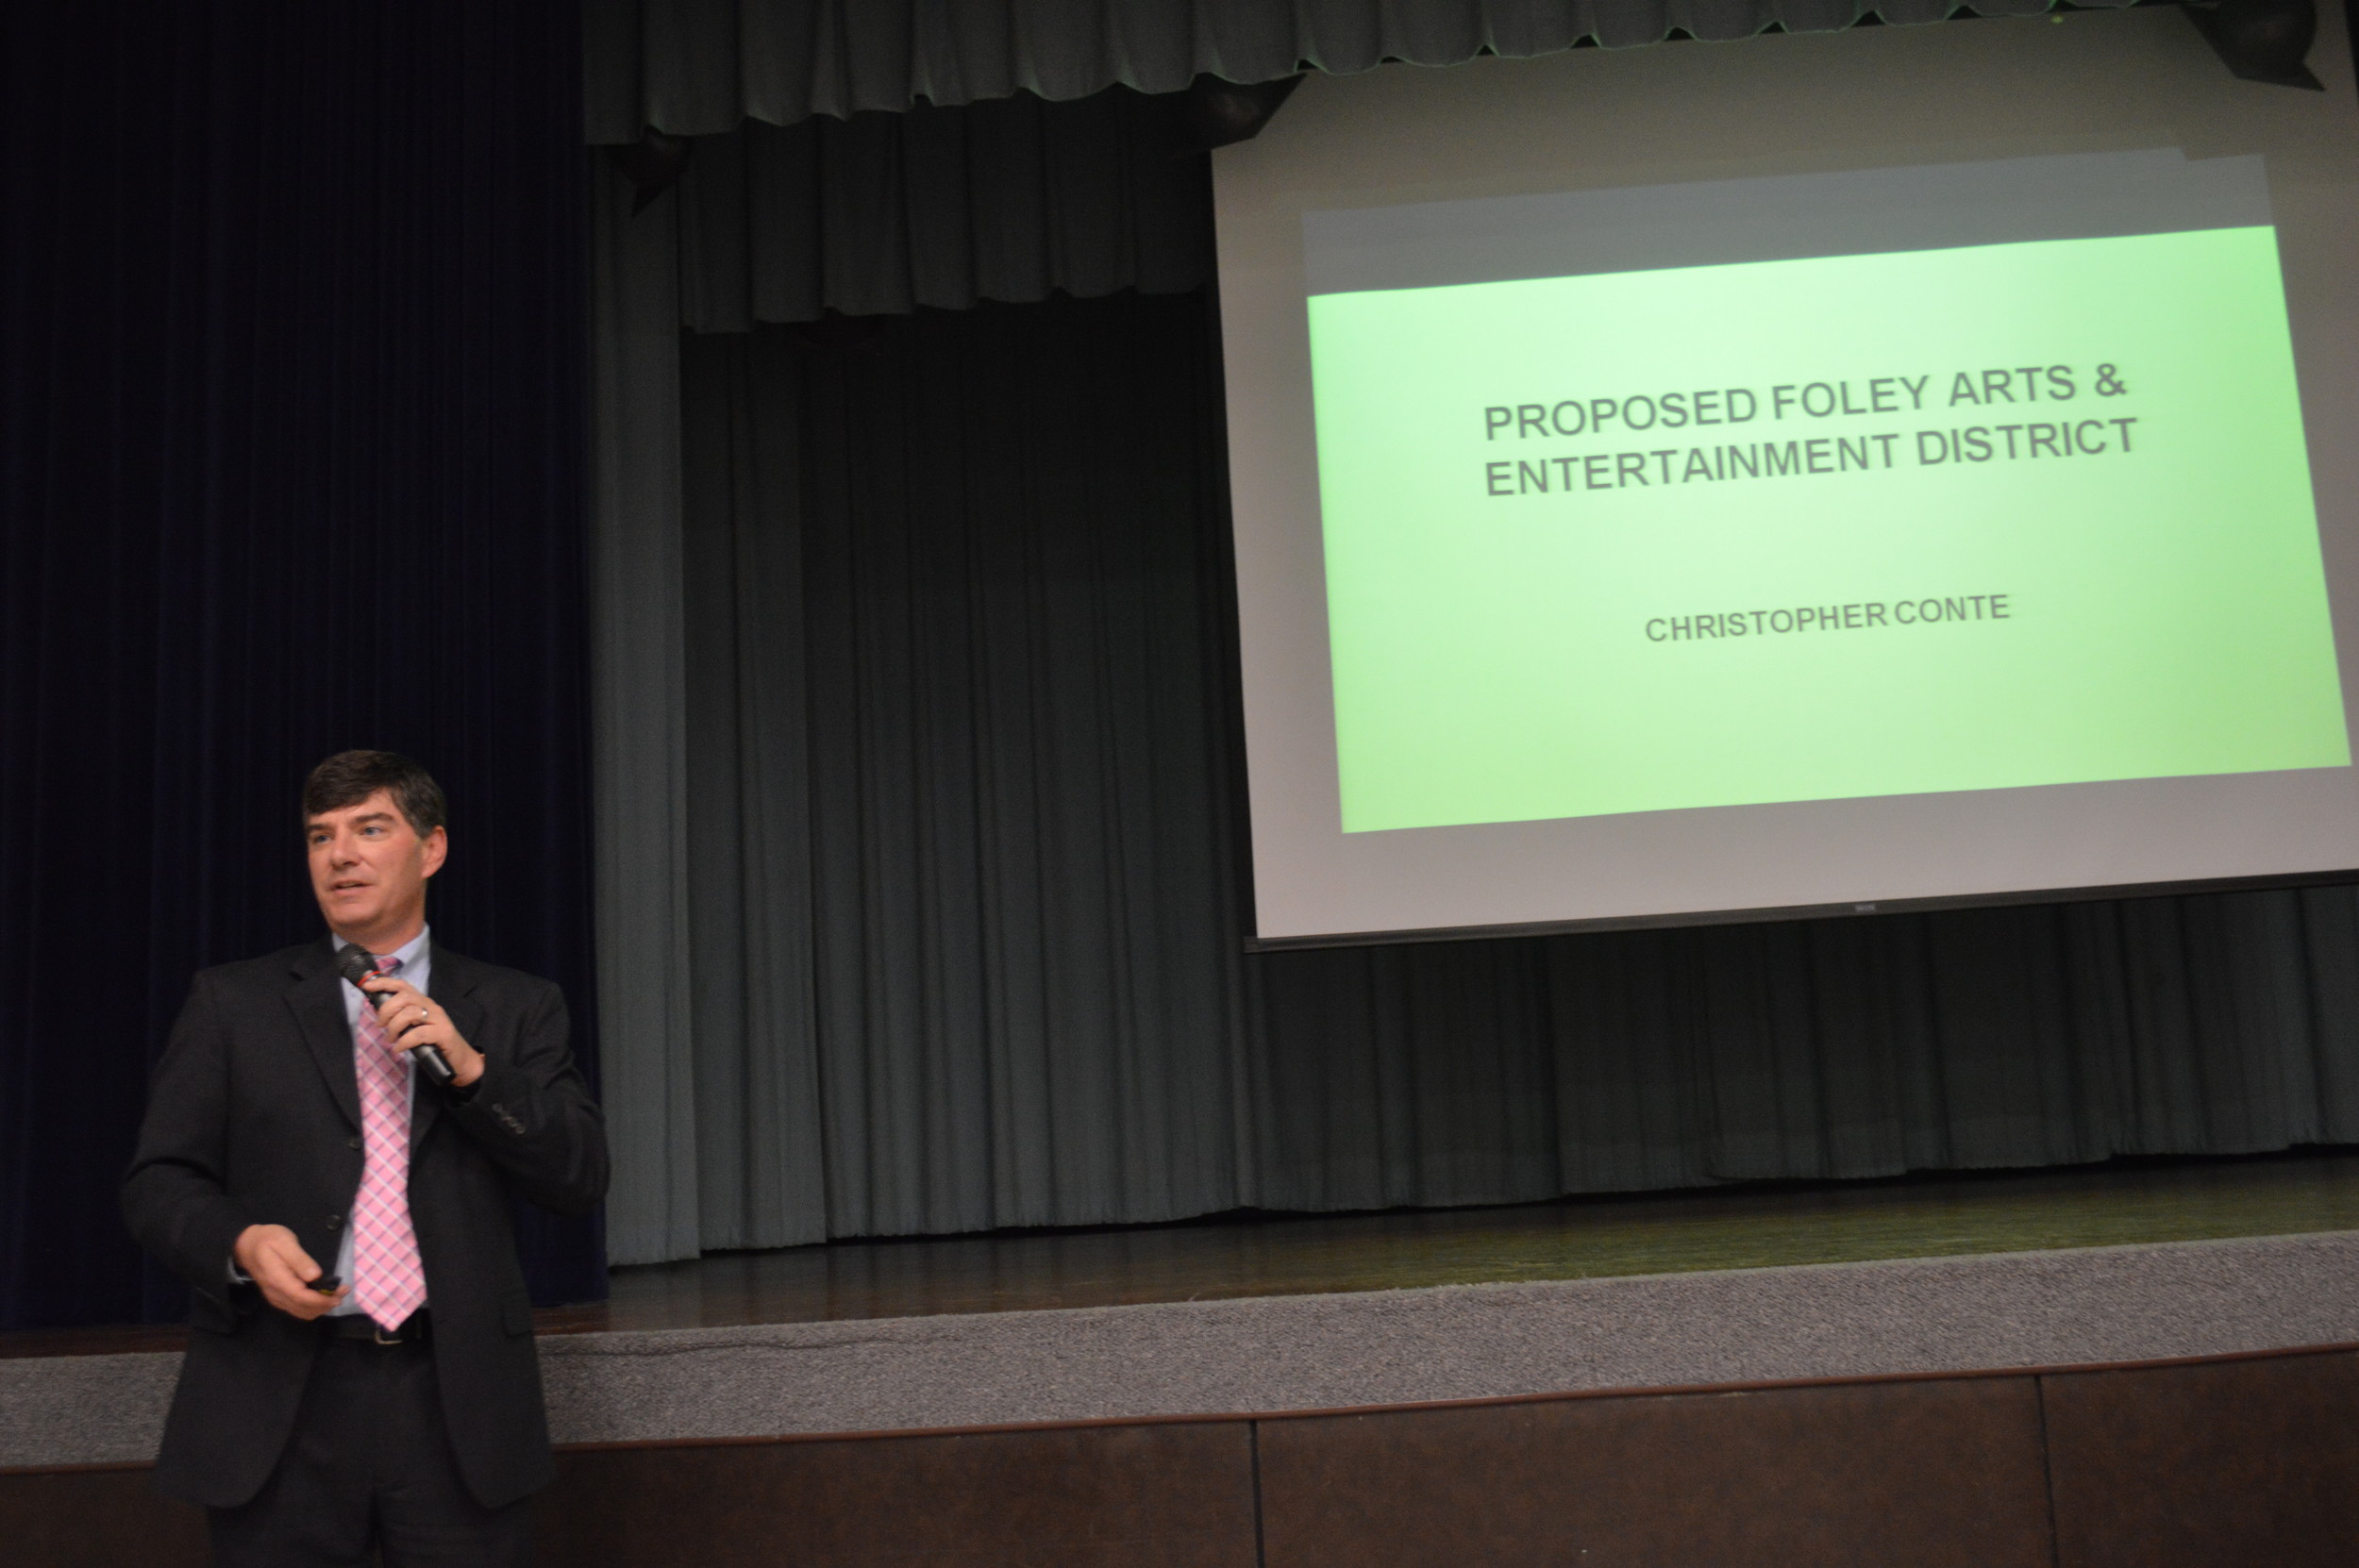 City of Foley attorney Chris Conte spoke about a possible Arts and Entertainment District during the Moving Foley Forward presentation, addressing concerns and answering questions from citizens.